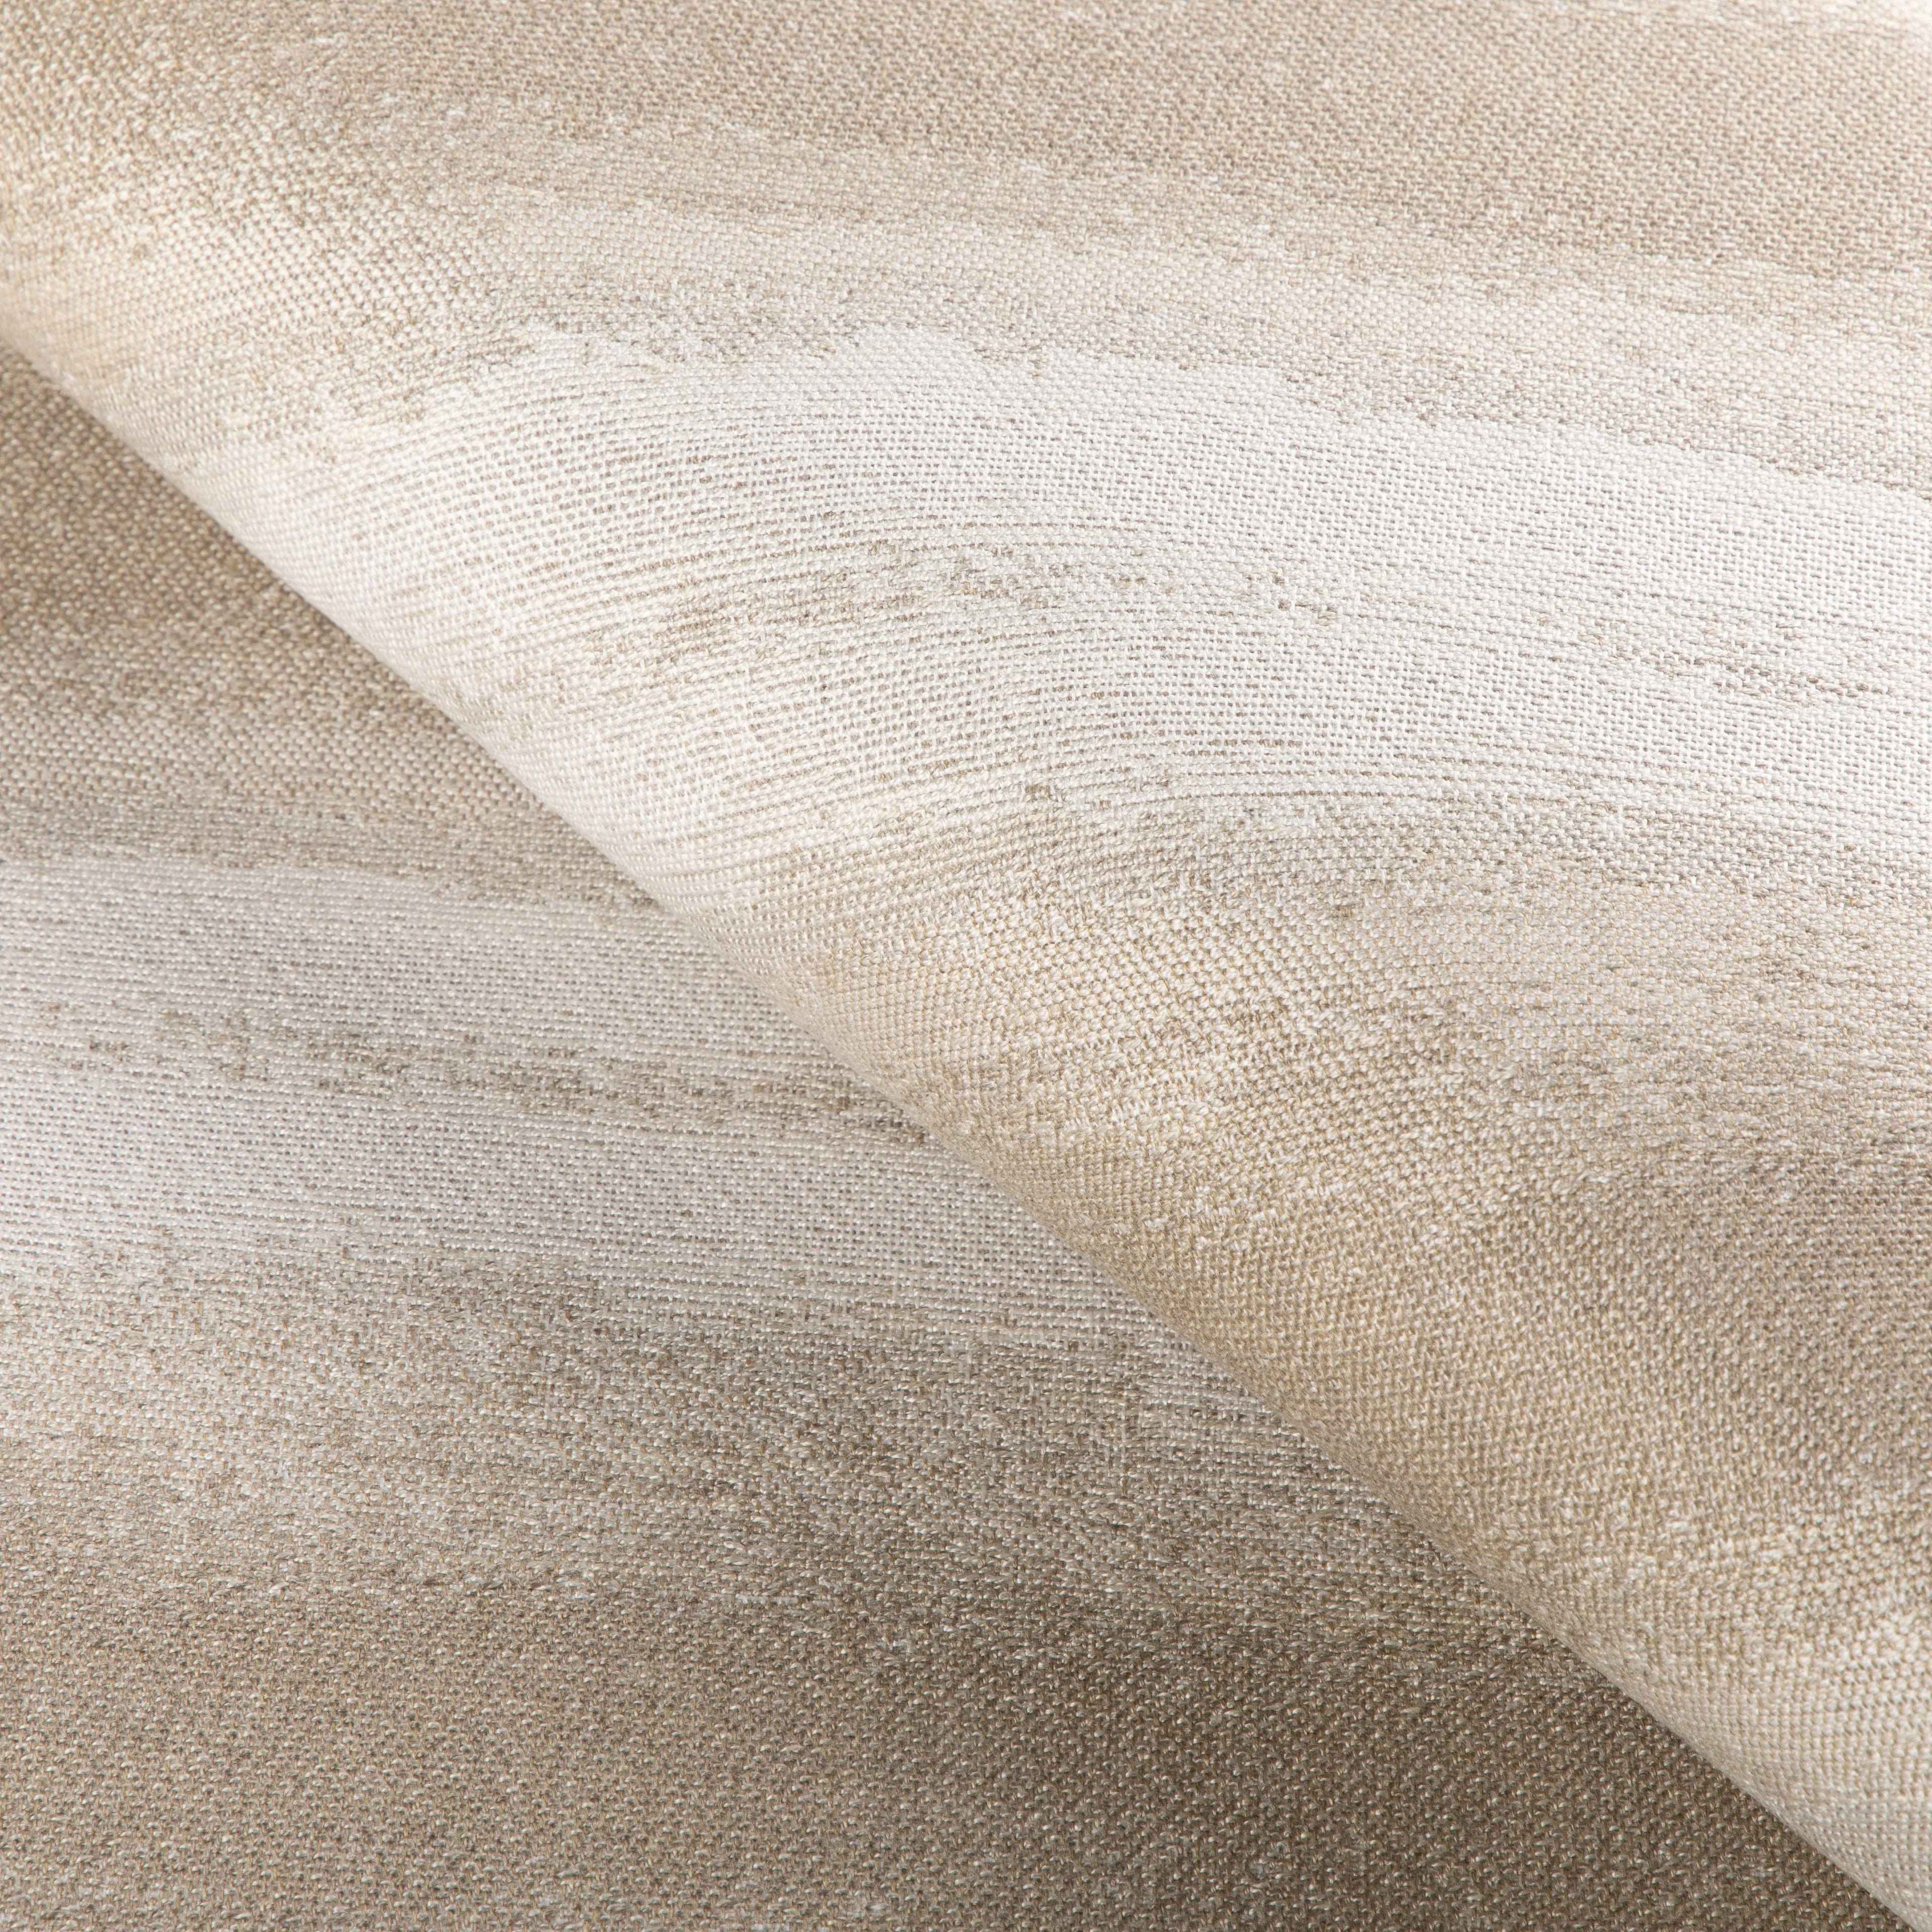 Fabric sample of Riverwalk fabric in sand color - pattern 36932.16.0 - by Kravet Couture in the Riviera collection